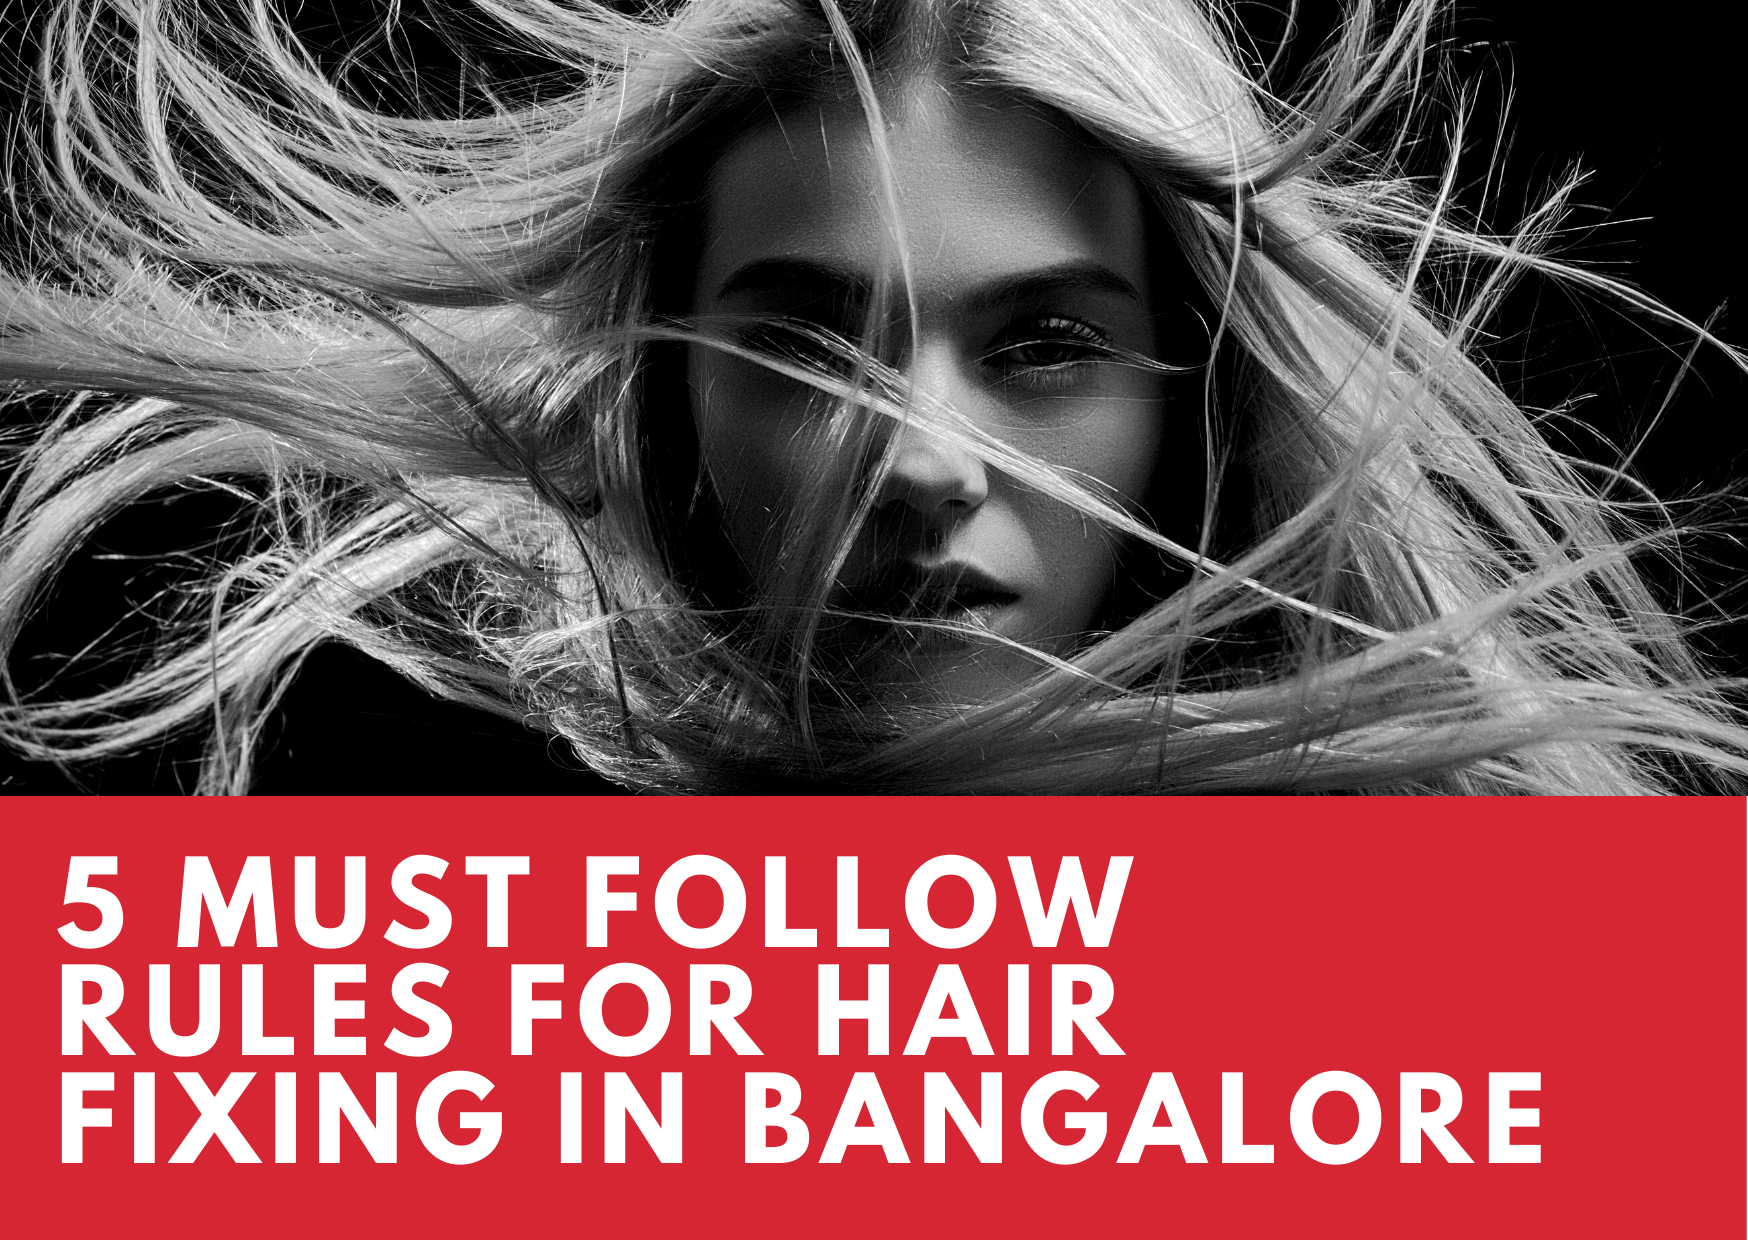 5 must follow rules for hair fixing in Bangalore